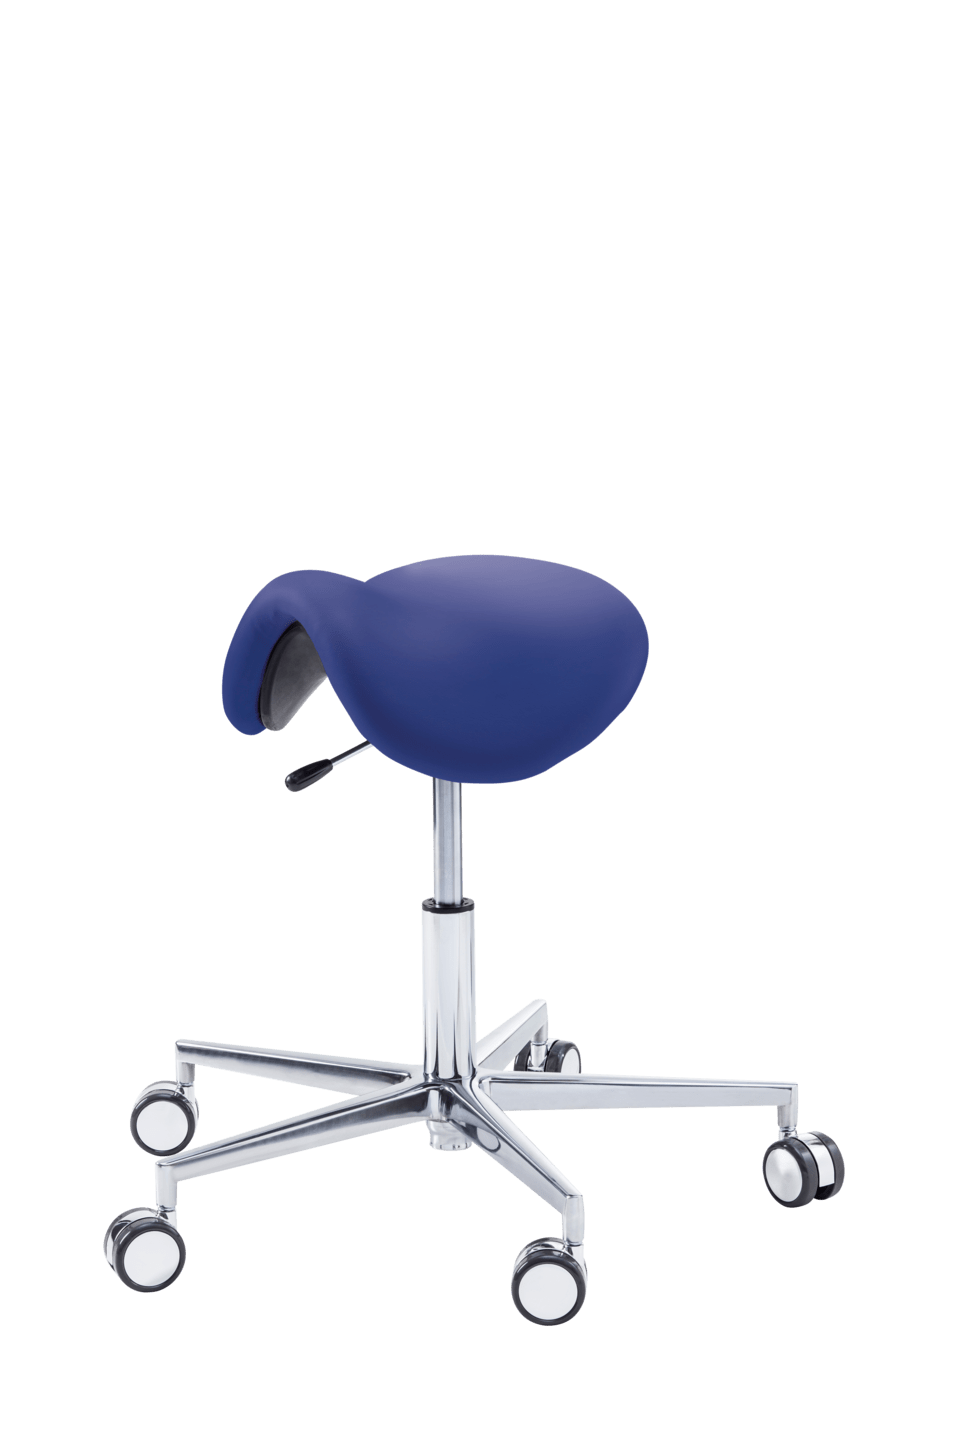 RUCK - STOOL saddle in baltic